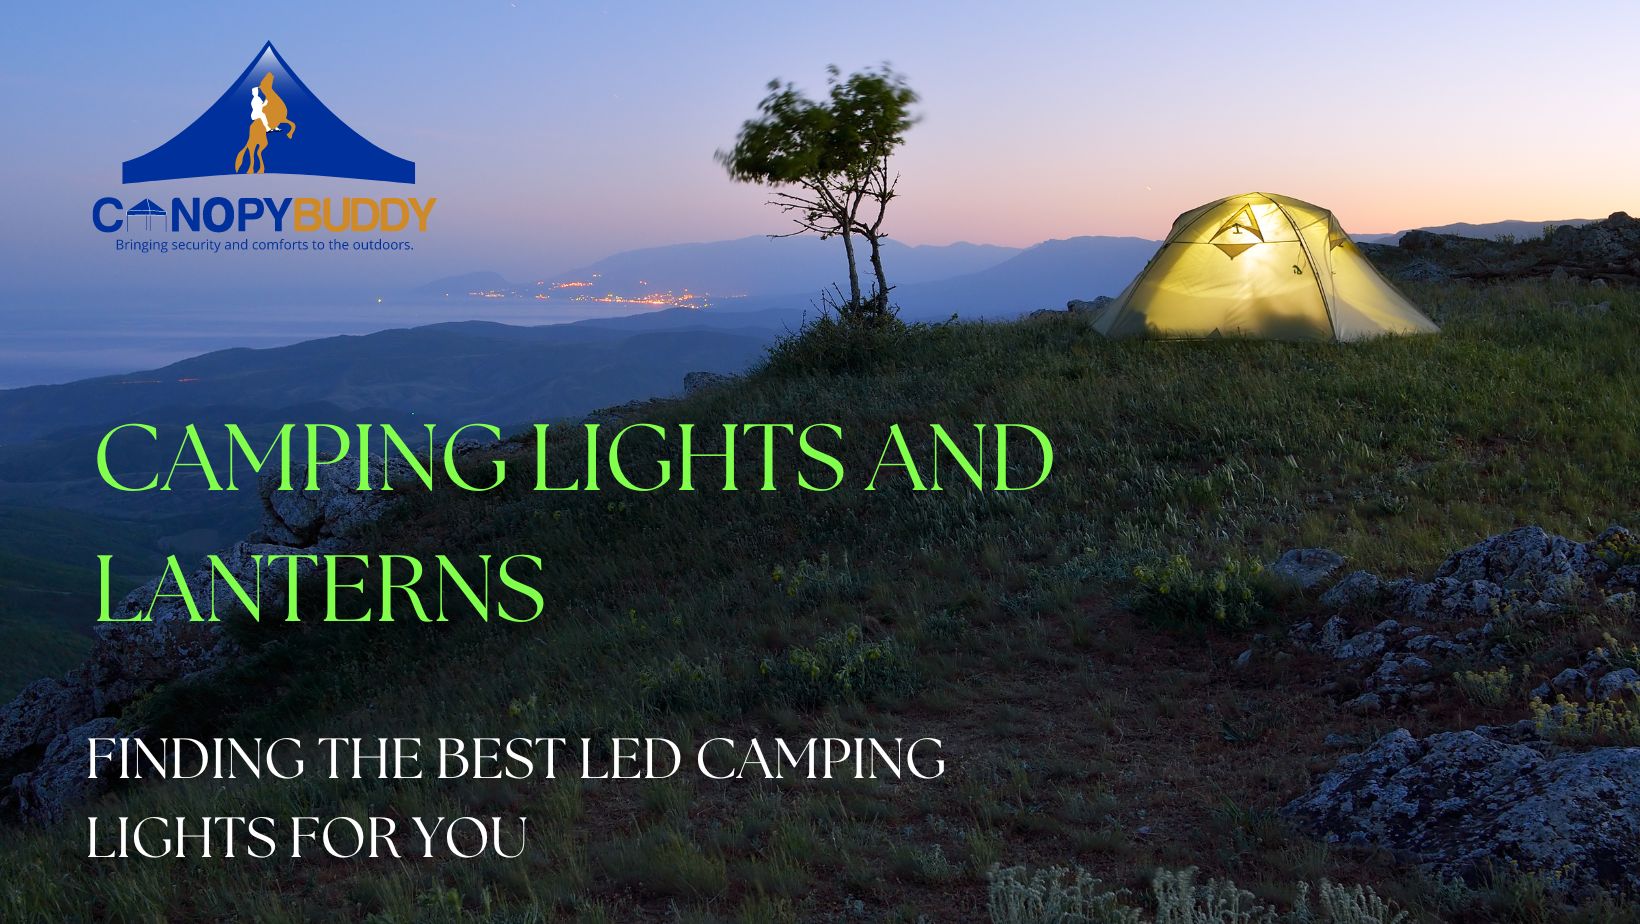 Camping Lights and Lanterns – Finding the Best LED Camping Lights for You - Canopy Buddy